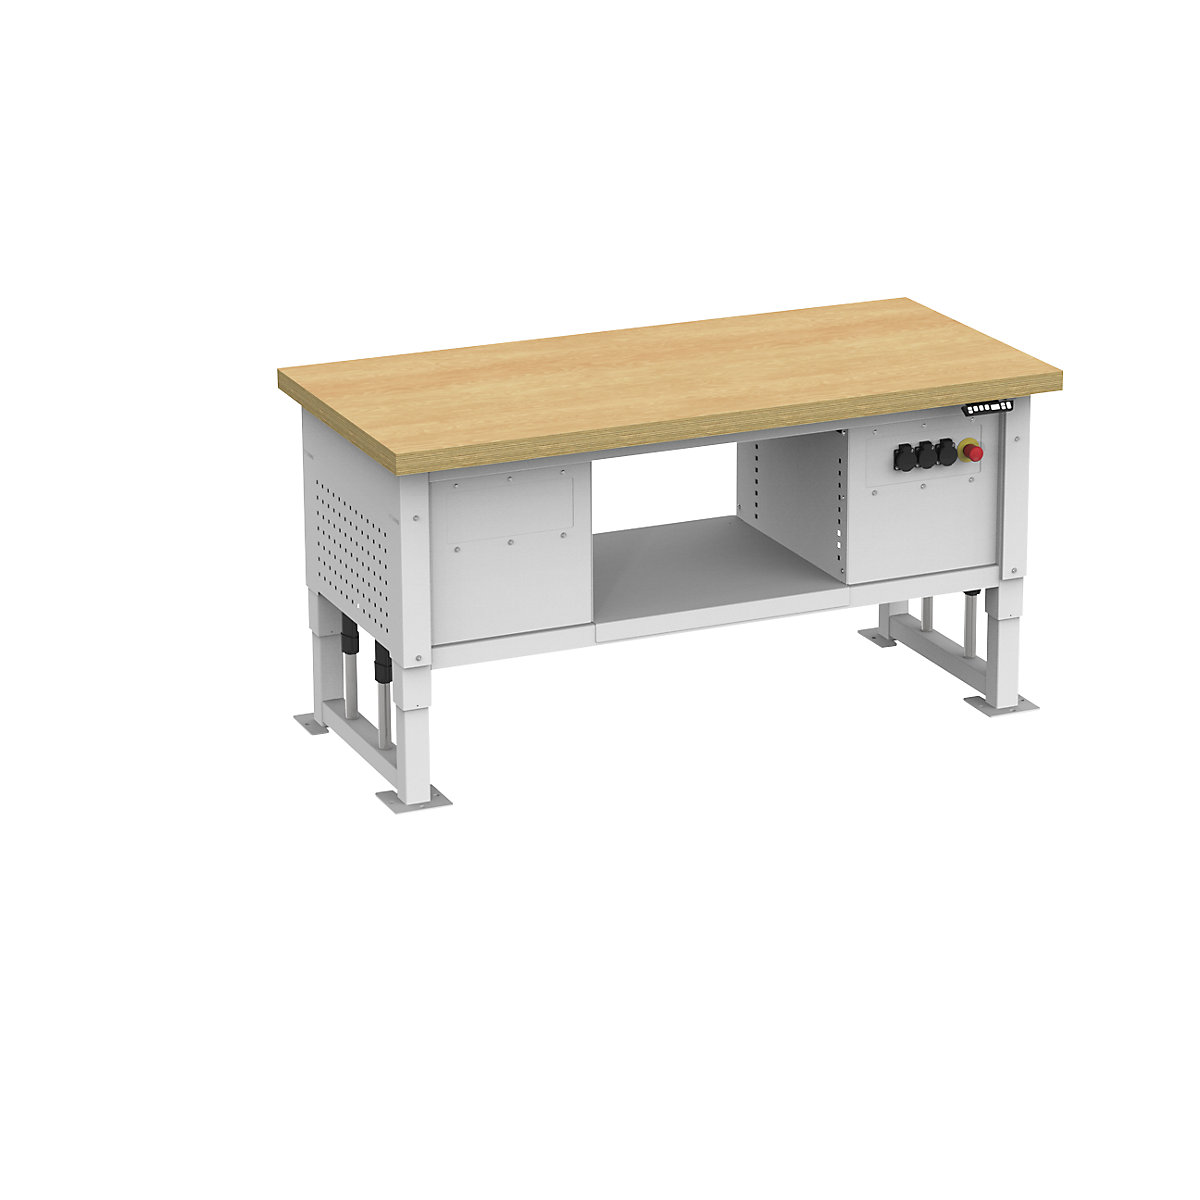 Heavy duty table, electrically height adjustable, worktop width 1685 mm, max. surface load 2000 kg, light grey RAL 7035-1